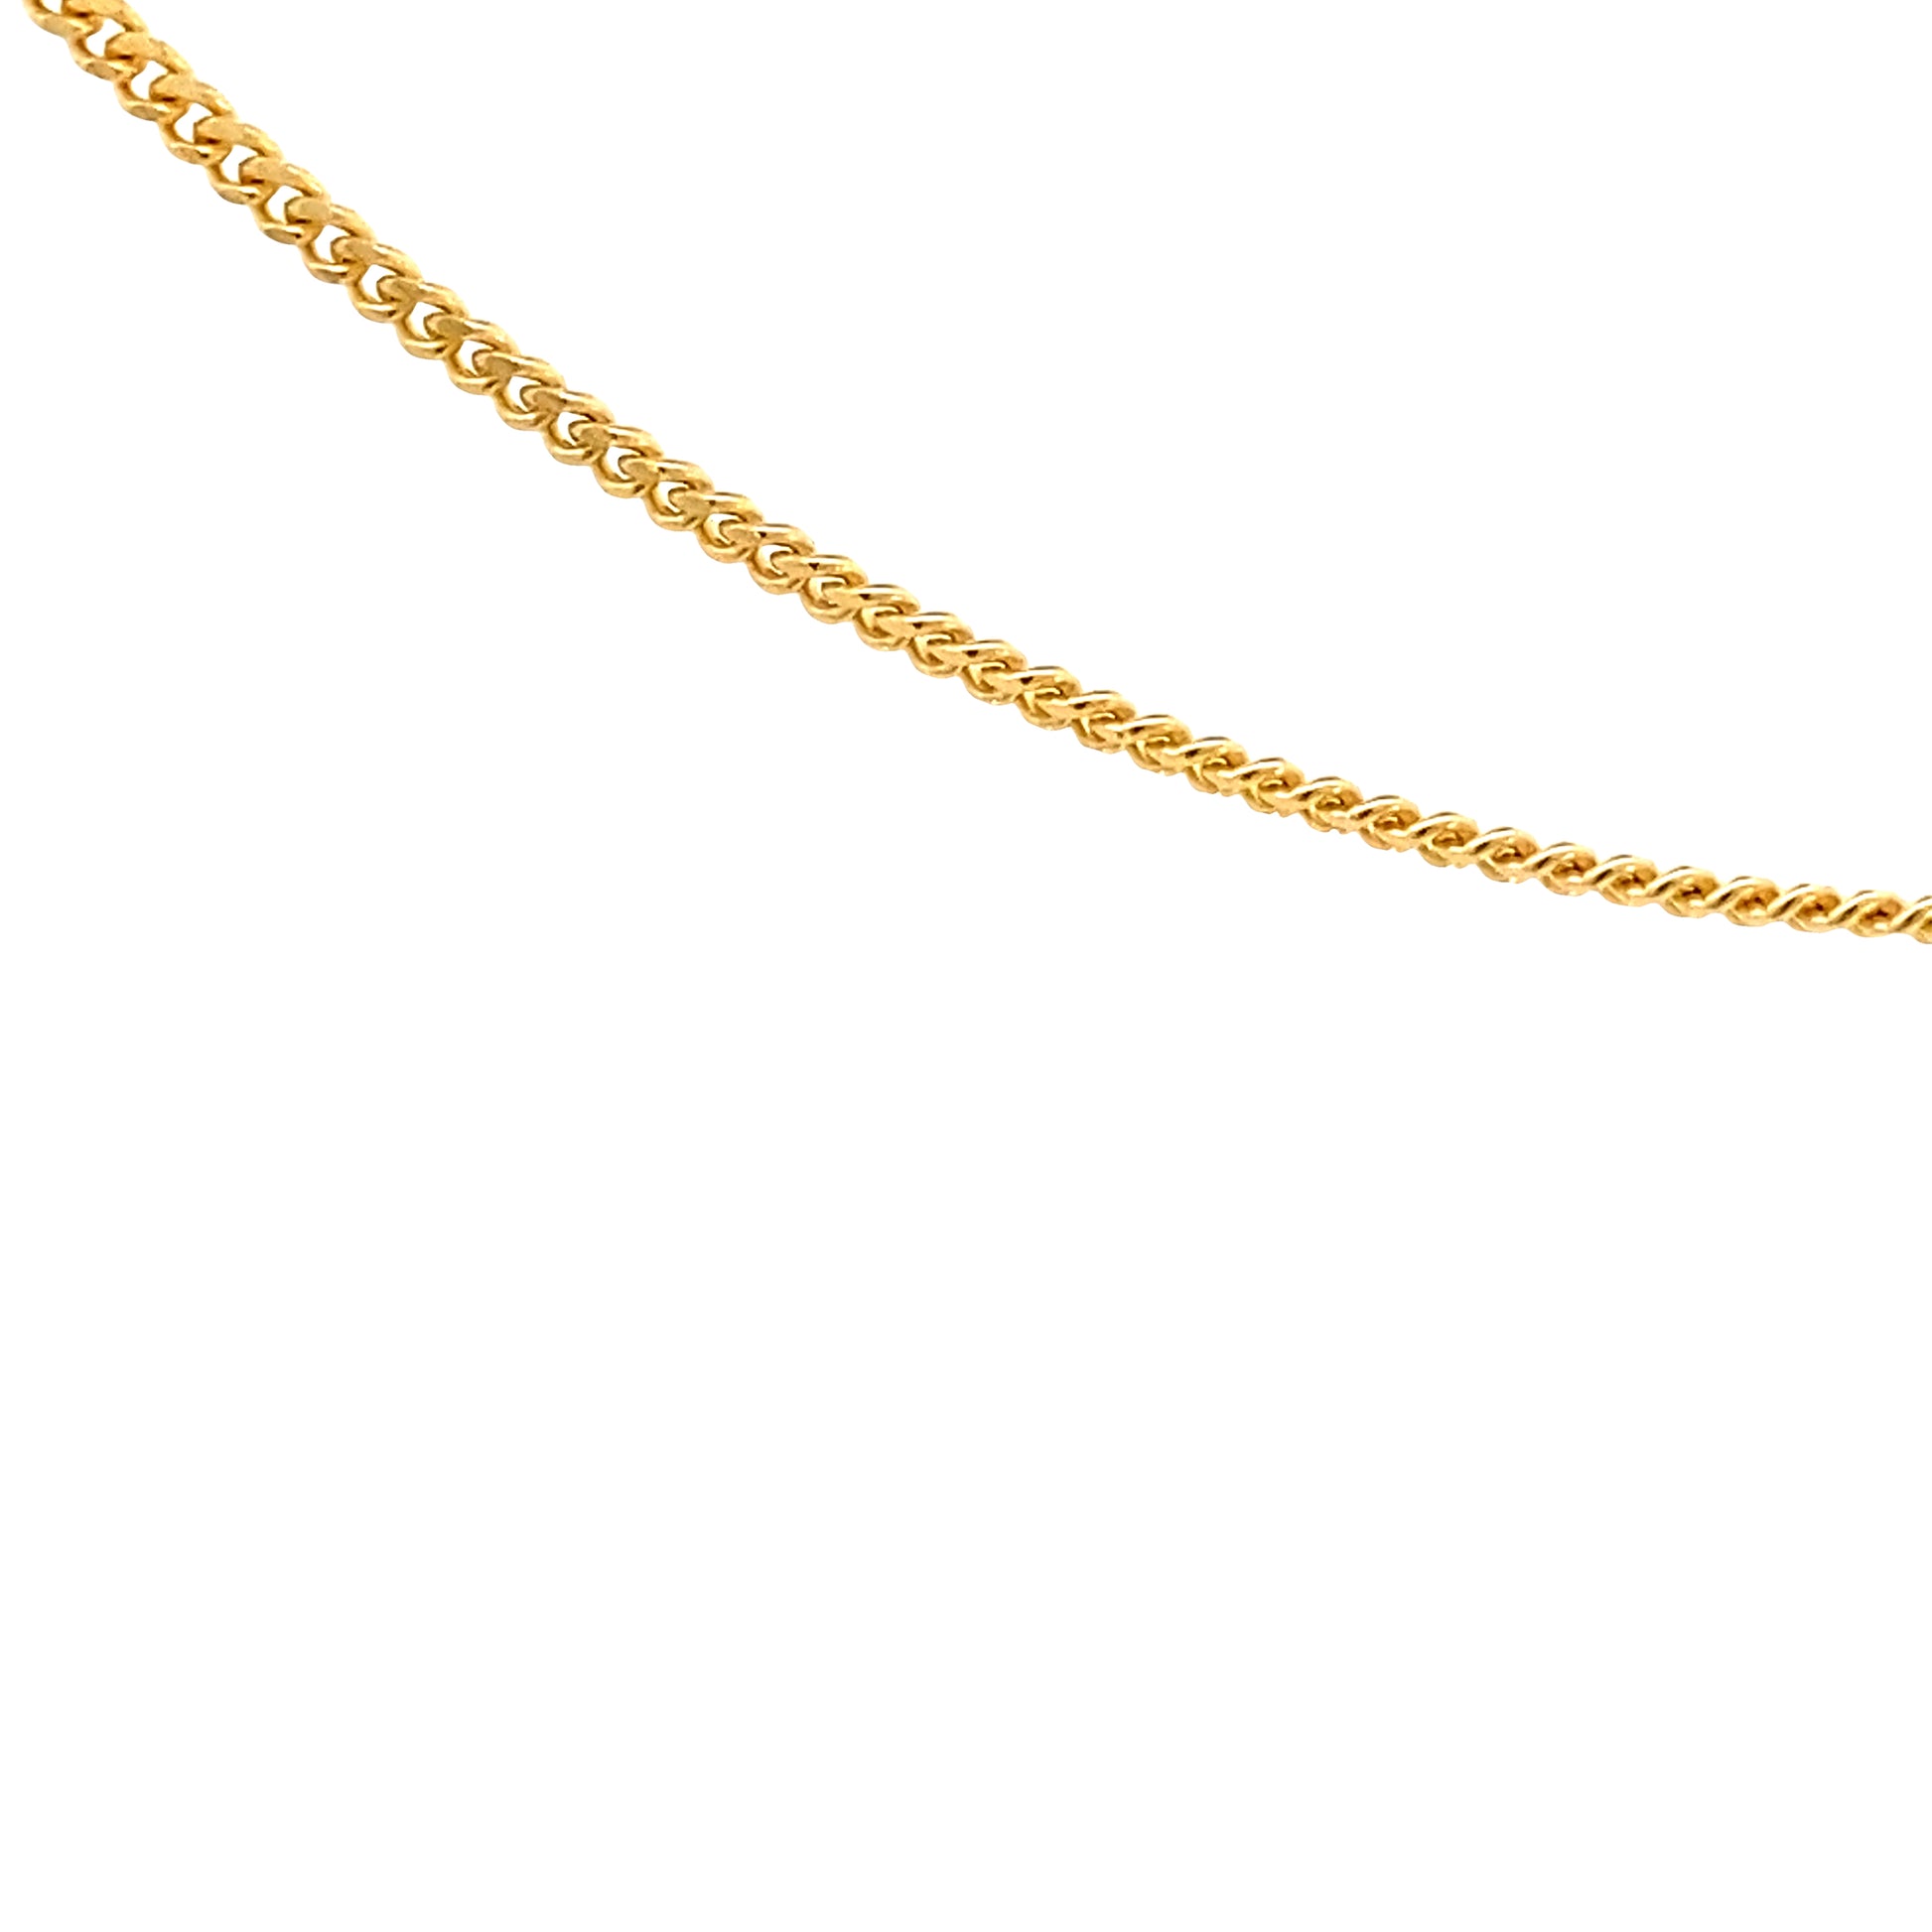 14K Gold Solid Cuban Chain | Luby Gold Collection | Luby 